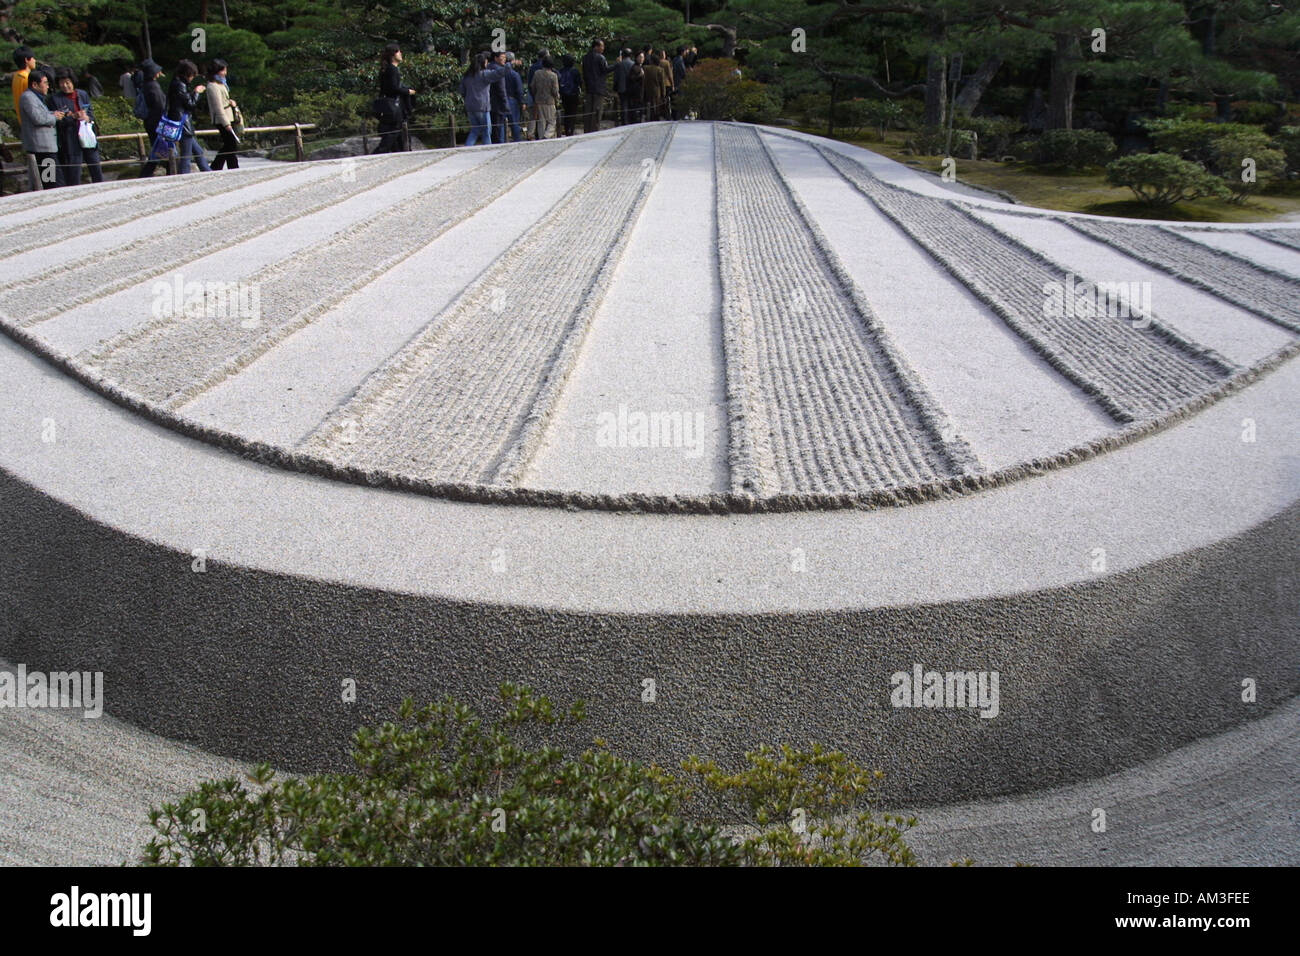 Immaculate typical iconic silver sand Zen landscaped garden at the Silver Temple in Kyoto Kansai Japan Asia Stock Photo